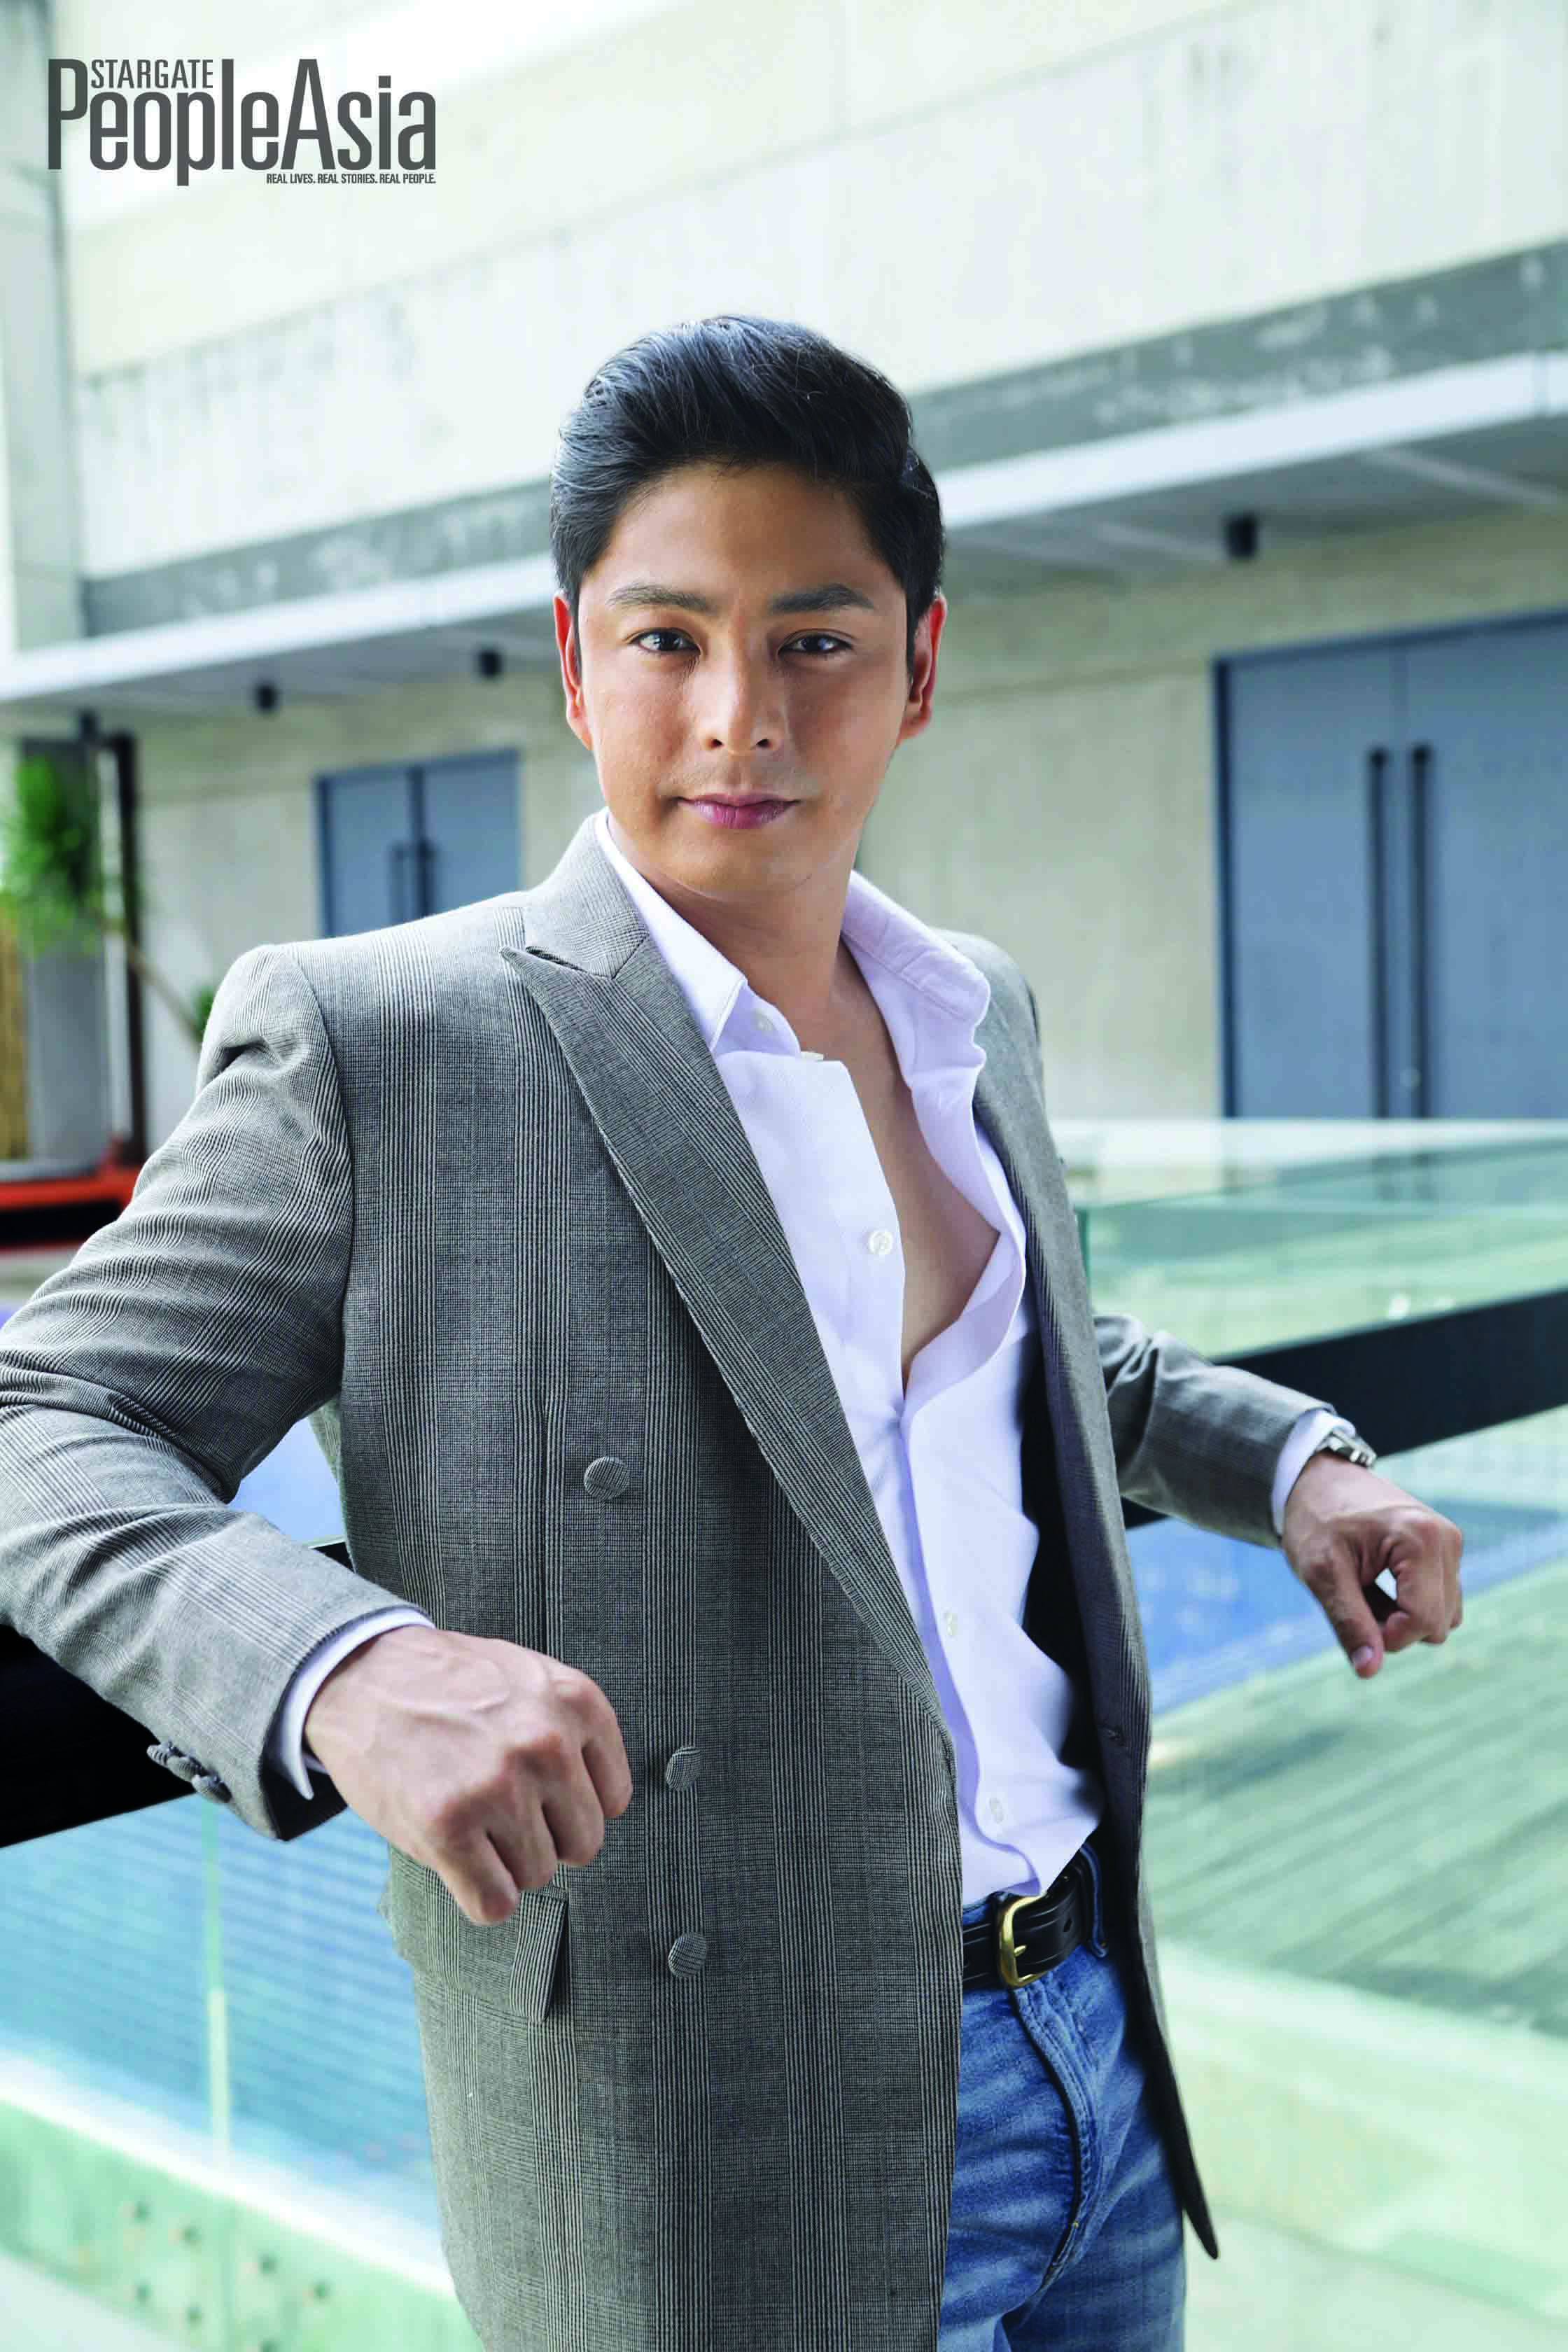 Coco Martin denies issue with Vice Ganda